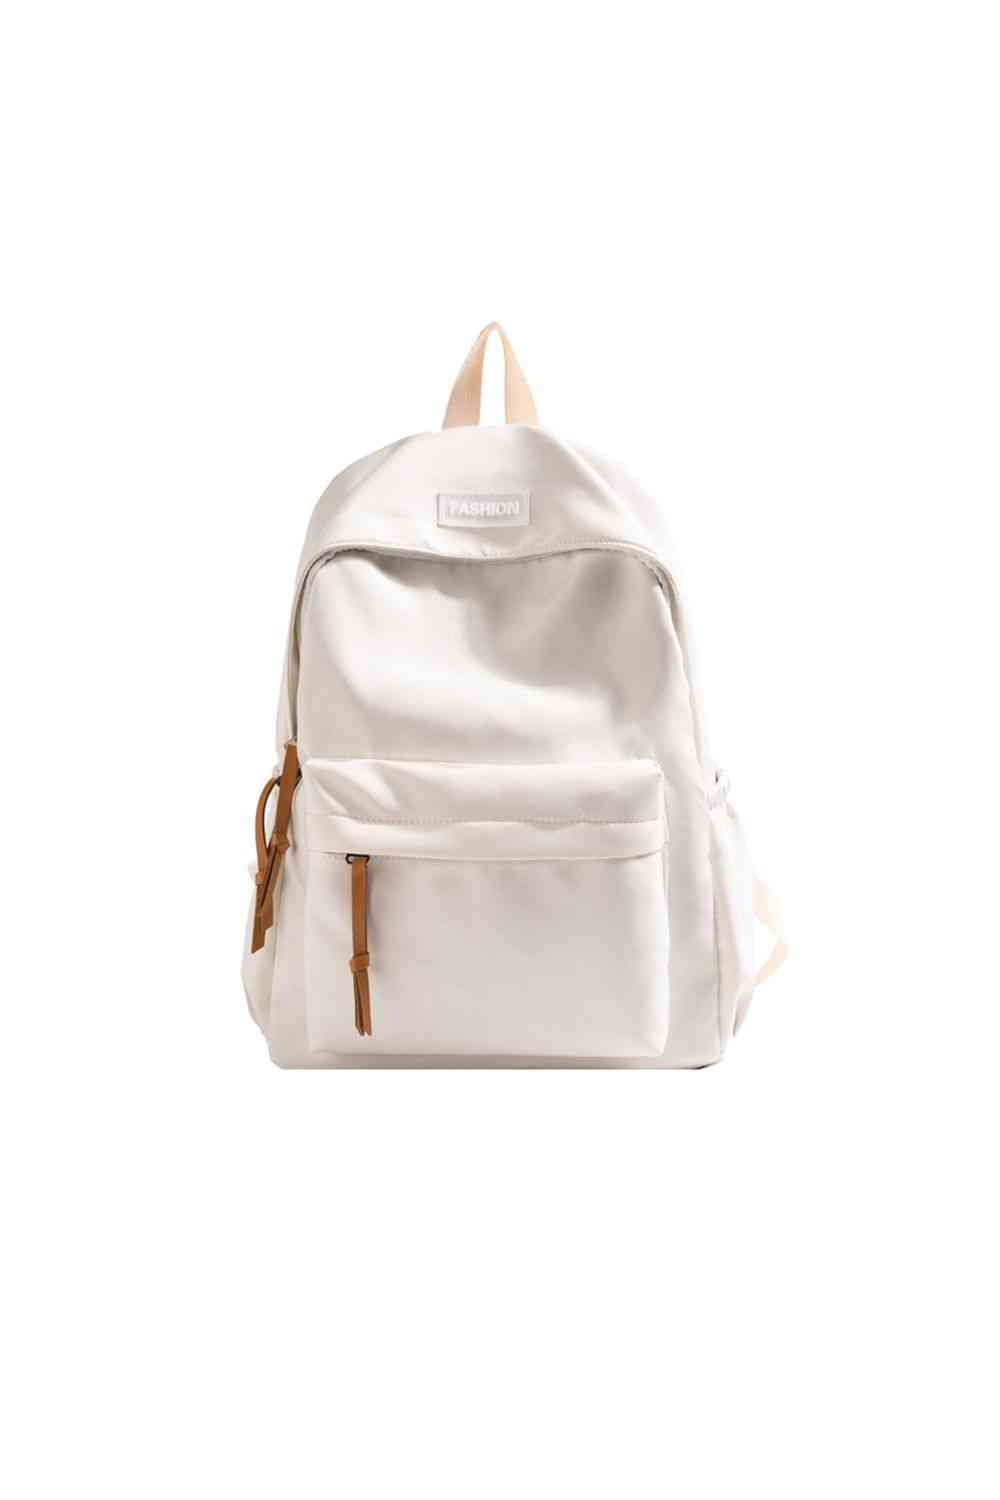 Adored FASHION Polyester Backpack White One Size